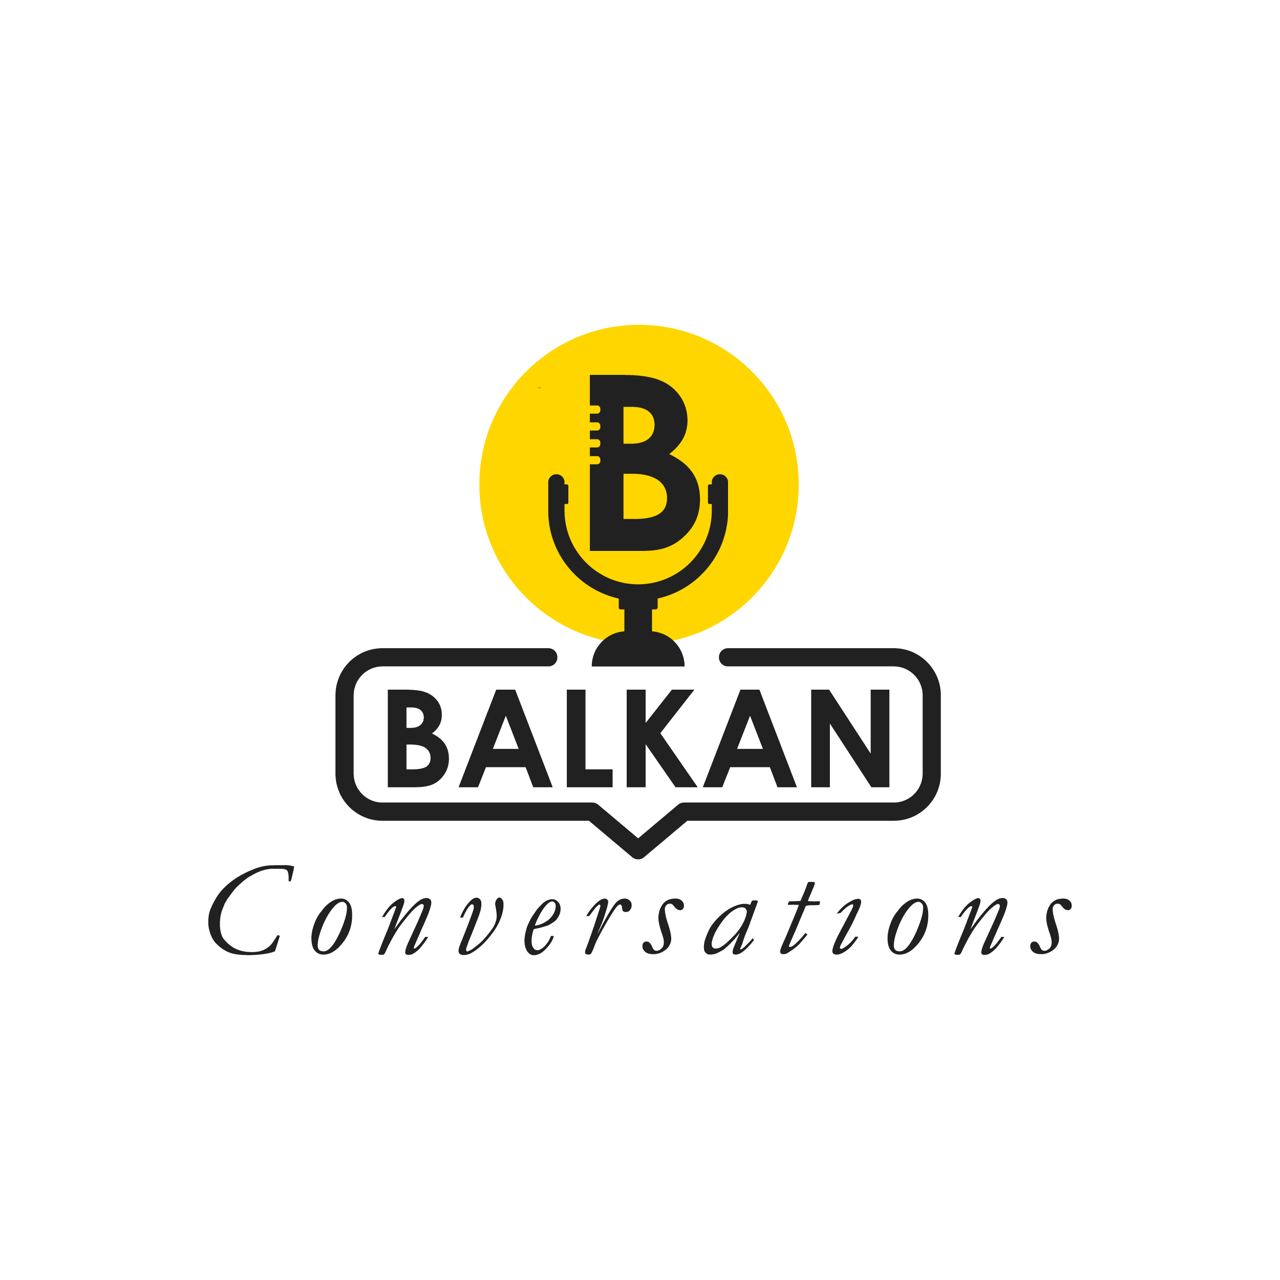 LIVE 3:30pm EST: Balkan Conversations - What's Going On With Serbia?